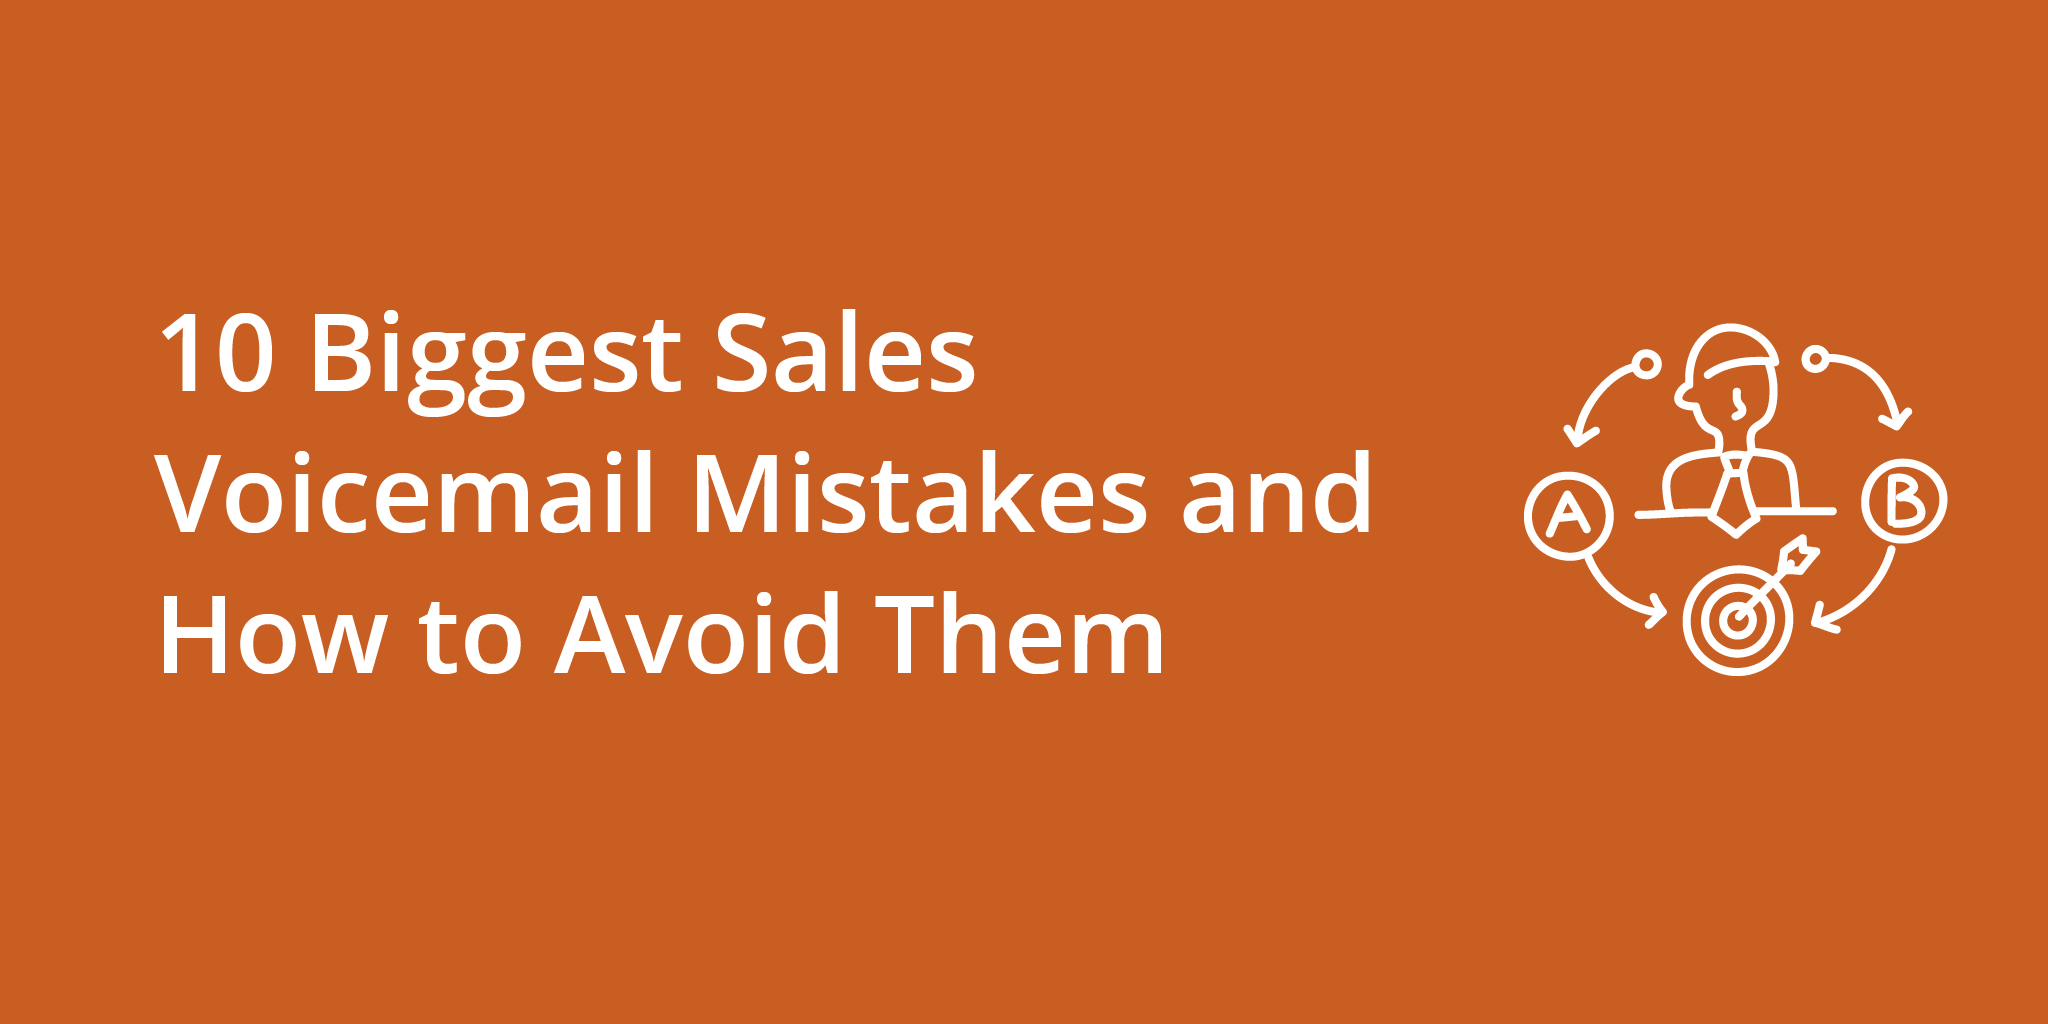 /assets/img/uploads/articles/10-biggest-sales-voicemail-mistakes-and-how-to-avoid-them_sales-cadence-blog-header.png